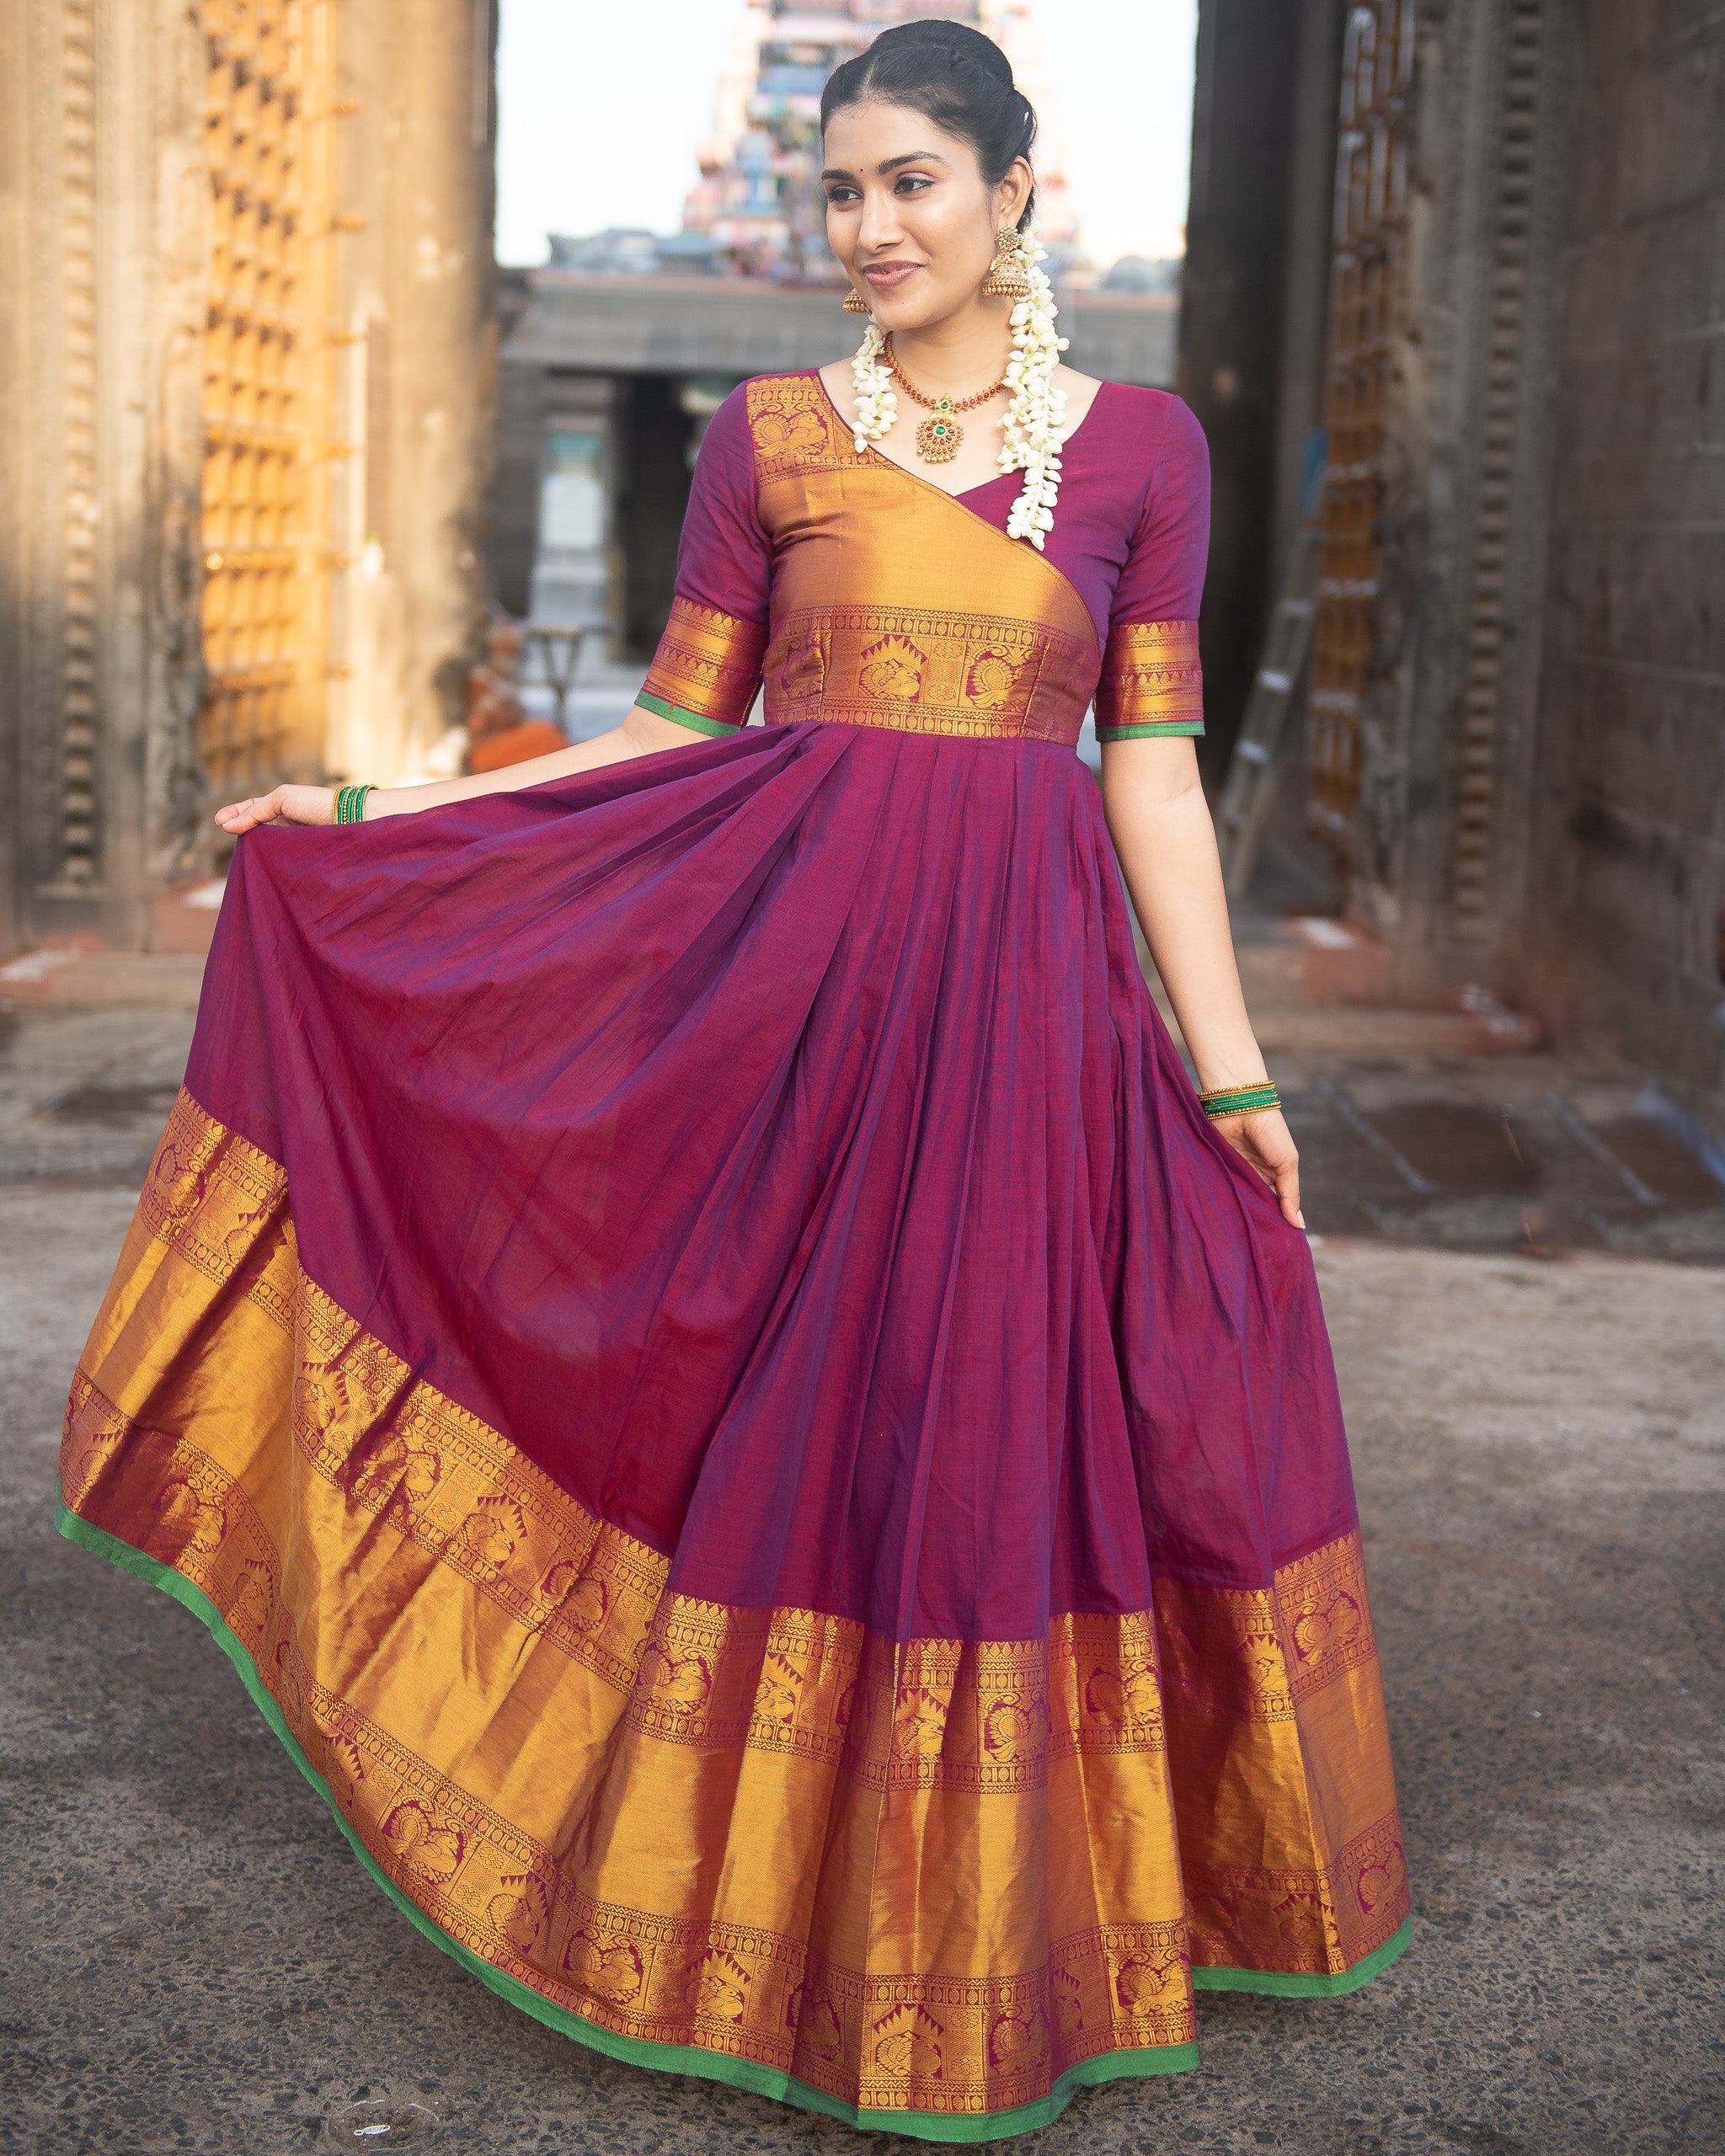 Sweetheart Neckline Embroidered Anarkali Gown | The Grand Trunk